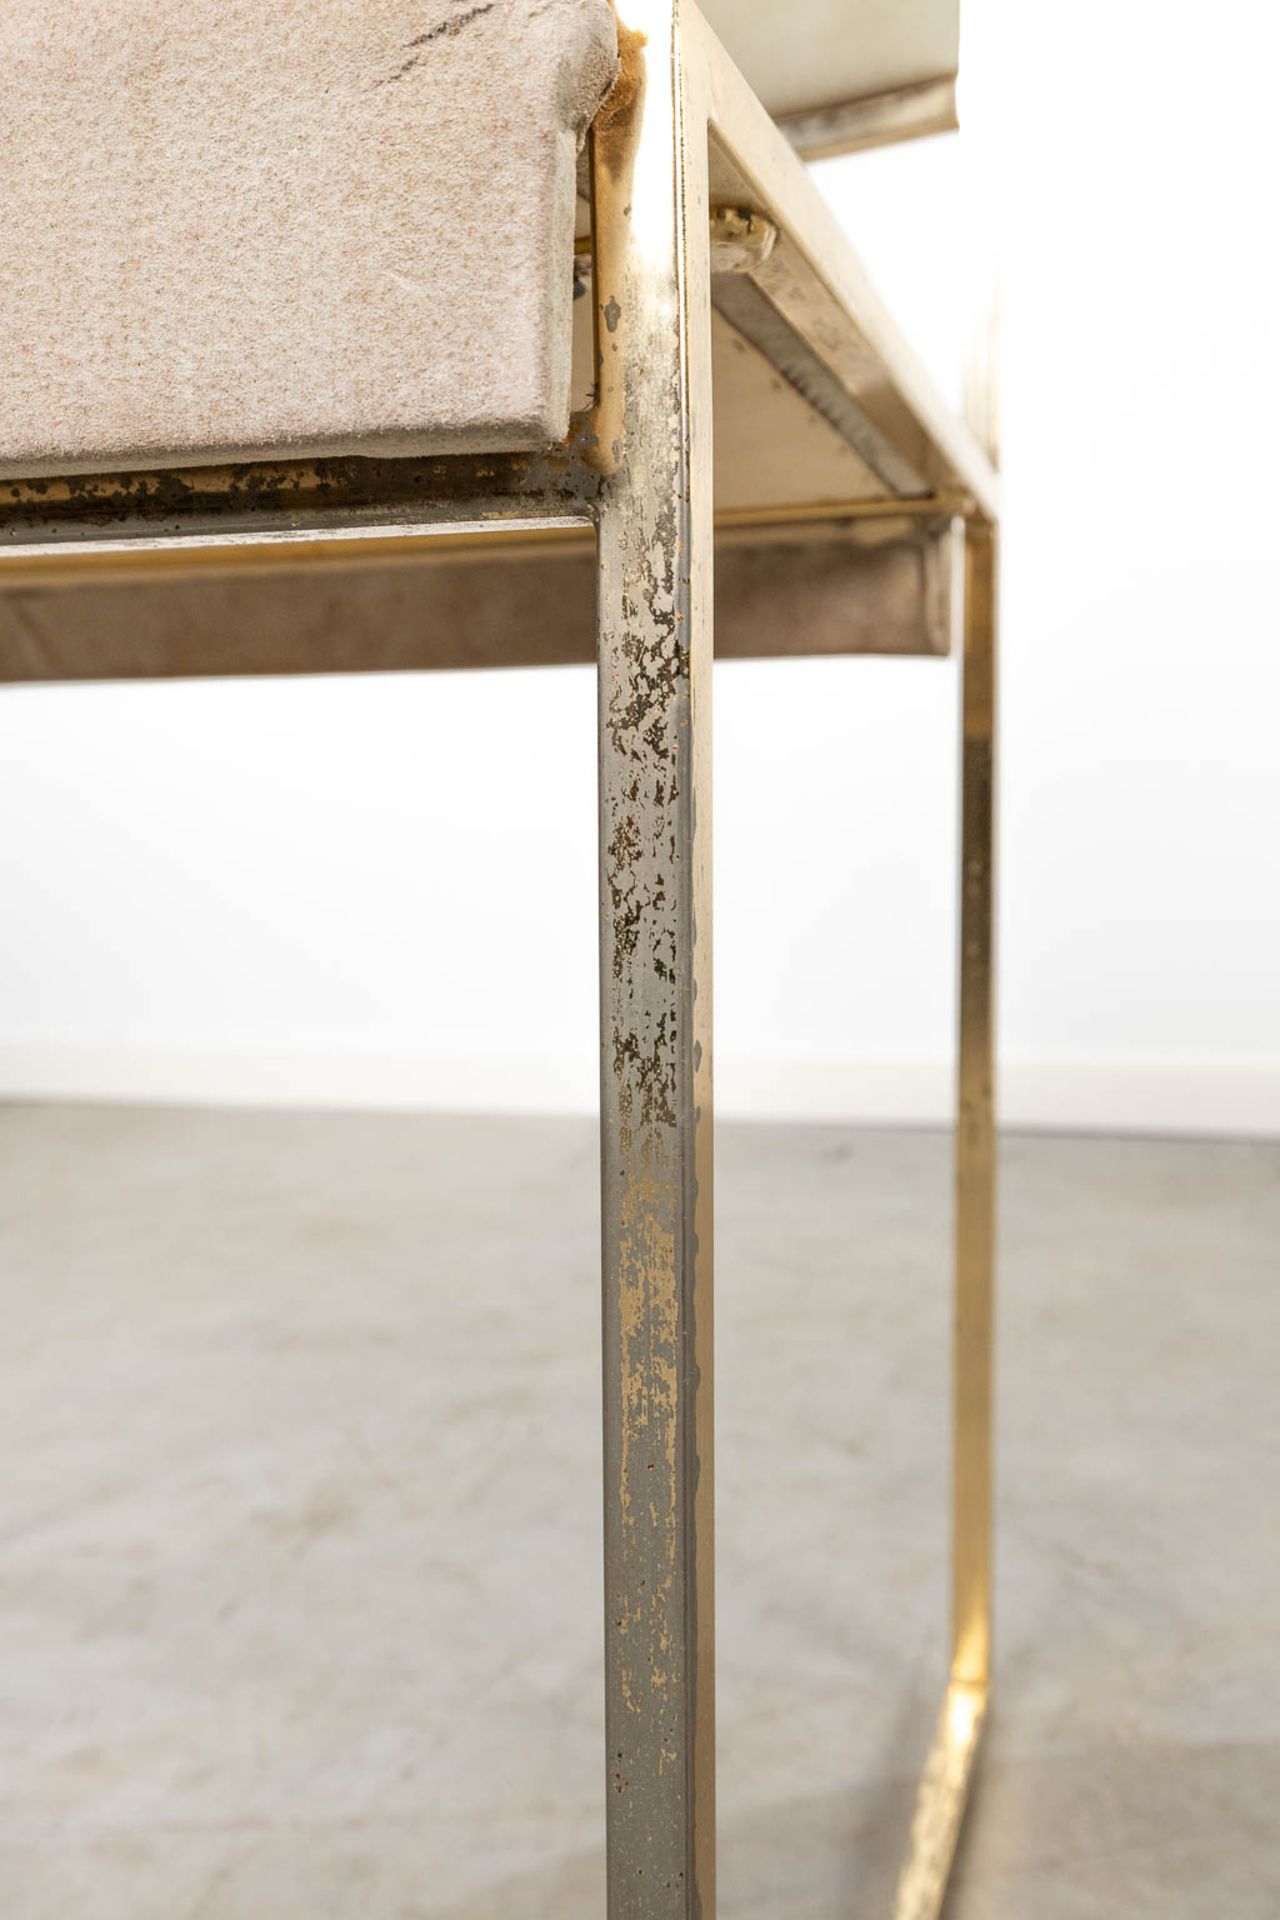 Willy RIZZO (1928-2013)ÊSet of 3 chairs, made of gold plated brass. Circa 1970. (49 x 48 x 78cm) - Image 3 of 14